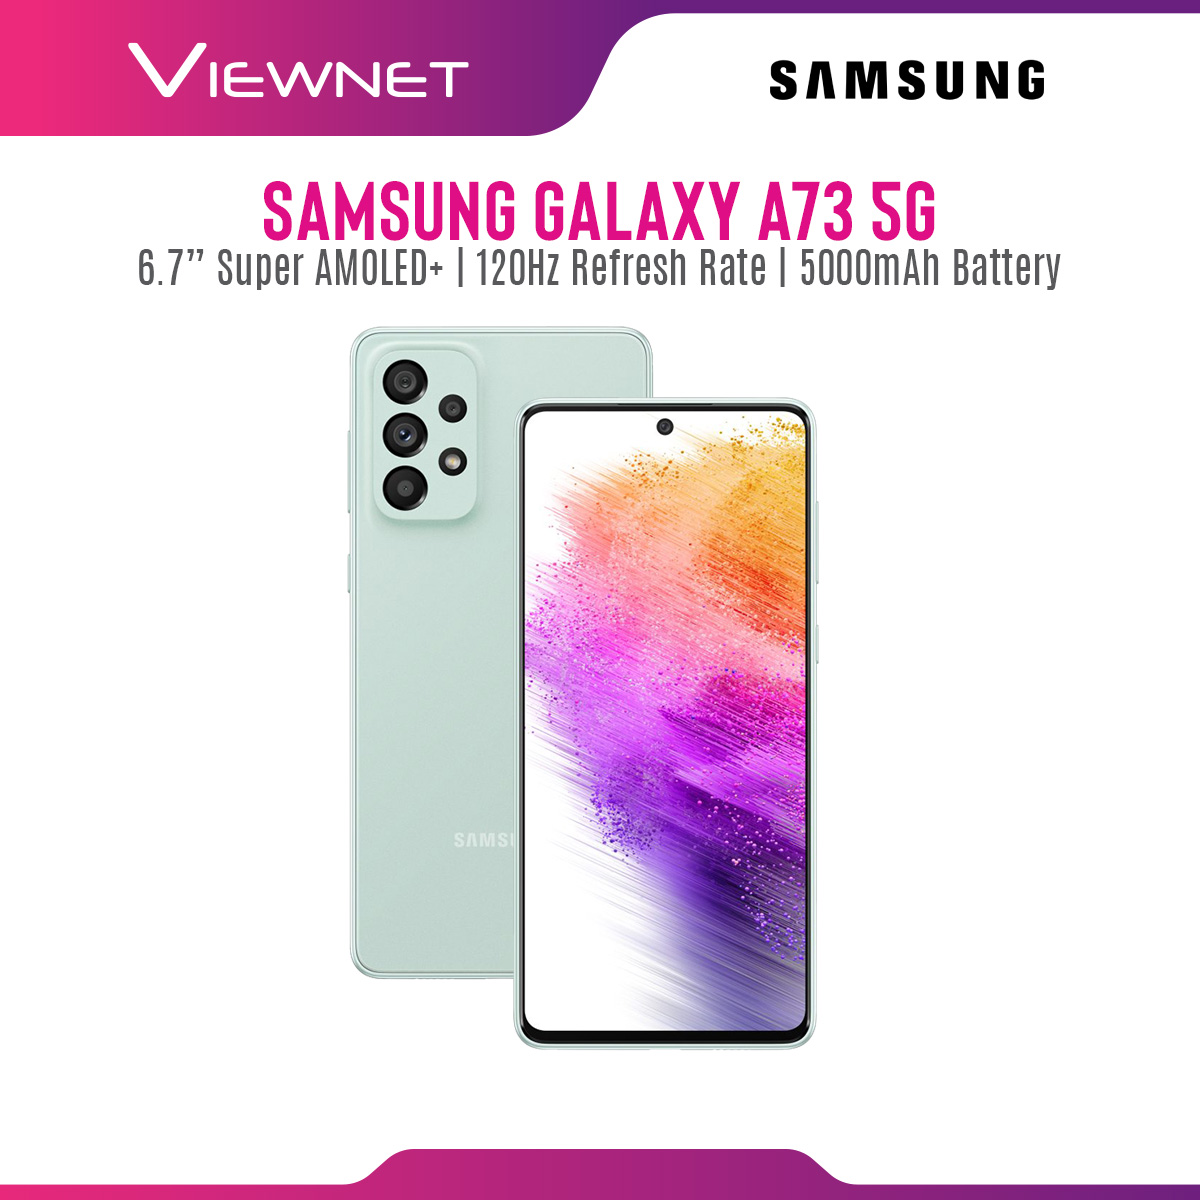 Samsung Galaxy A73  ( Mint ) 5G Smartphone with 6.7" Super AMOLED Display, 120Hz Refresh Rate, Android 12, MicroSD Slot Up to 1TB, 5000 mAh Battery 